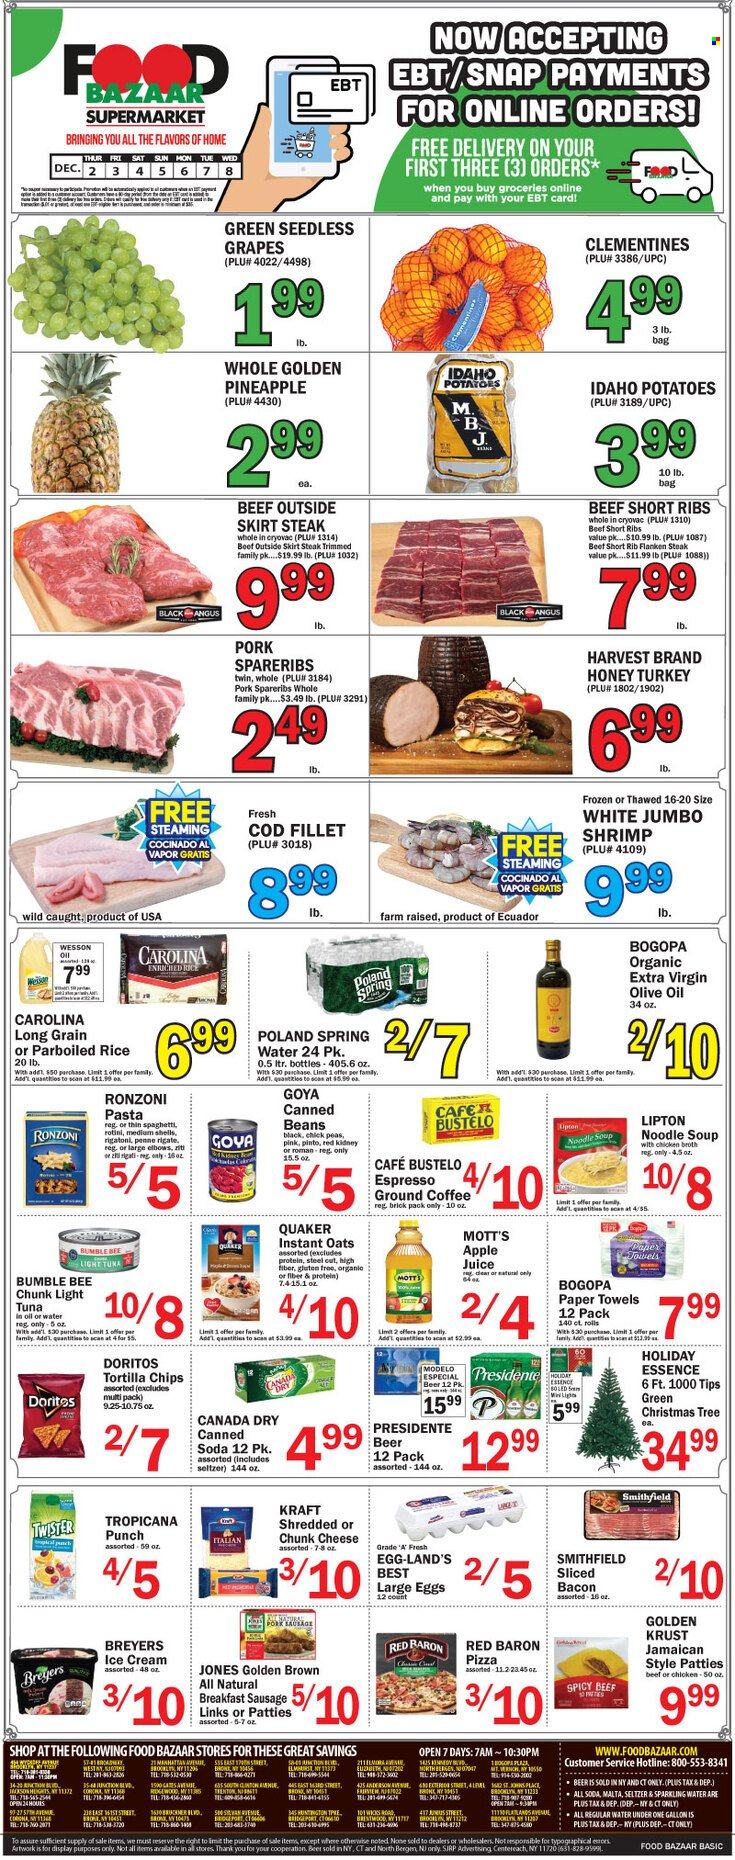 thumbnail - Food Bazaar Flyer - 12/02/2021 - 12/08/2021 - Sales products - seedless grapes, potatoes, grapes, pineapple, Mott's, cod, tuna, shrimps, spaghetti, pizza, soup, pasta, Bumble Bee, noodles cup, Quaker, noodles, Kraft®, chunk cheese, large eggs, ice cream, Red Baron, Doritos, tortilla chips, oats, light tuna, Goya, rice, penne, extra virgin olive oil, olive oil, oil, honey, apple juice, Canada Dry, juice, Lipton, seltzer water, spring water, soda, sparkling water, coffee, ground coffee, punch, beer, Modelo, beef ribs, steak, pork spare ribs, clementines. Page 1.